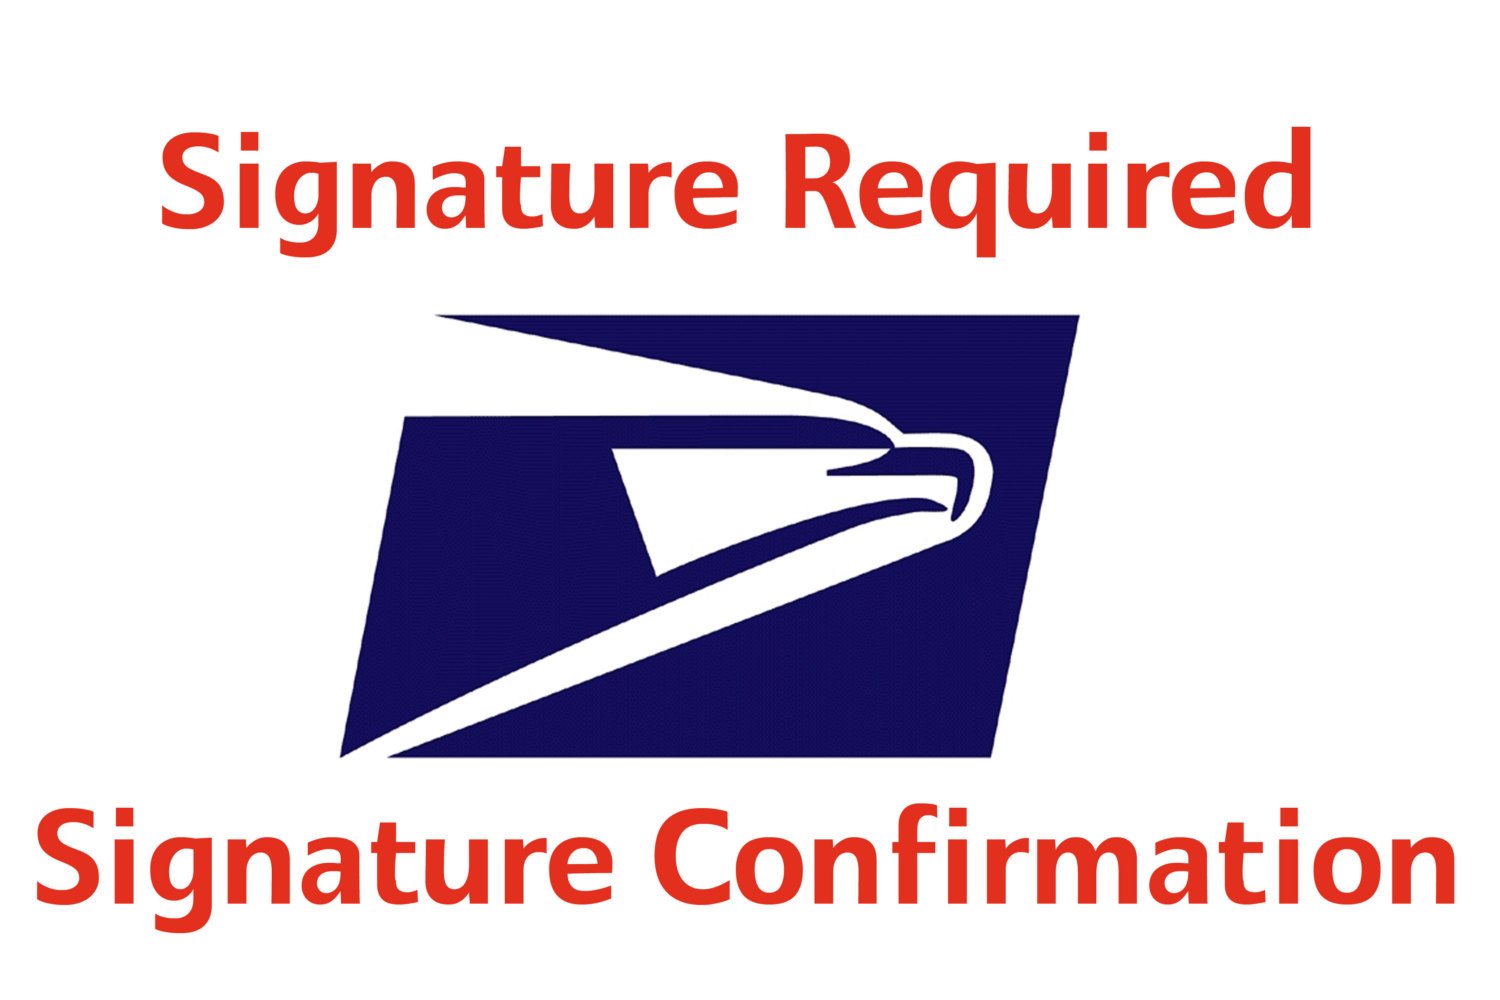 Signature Required packages